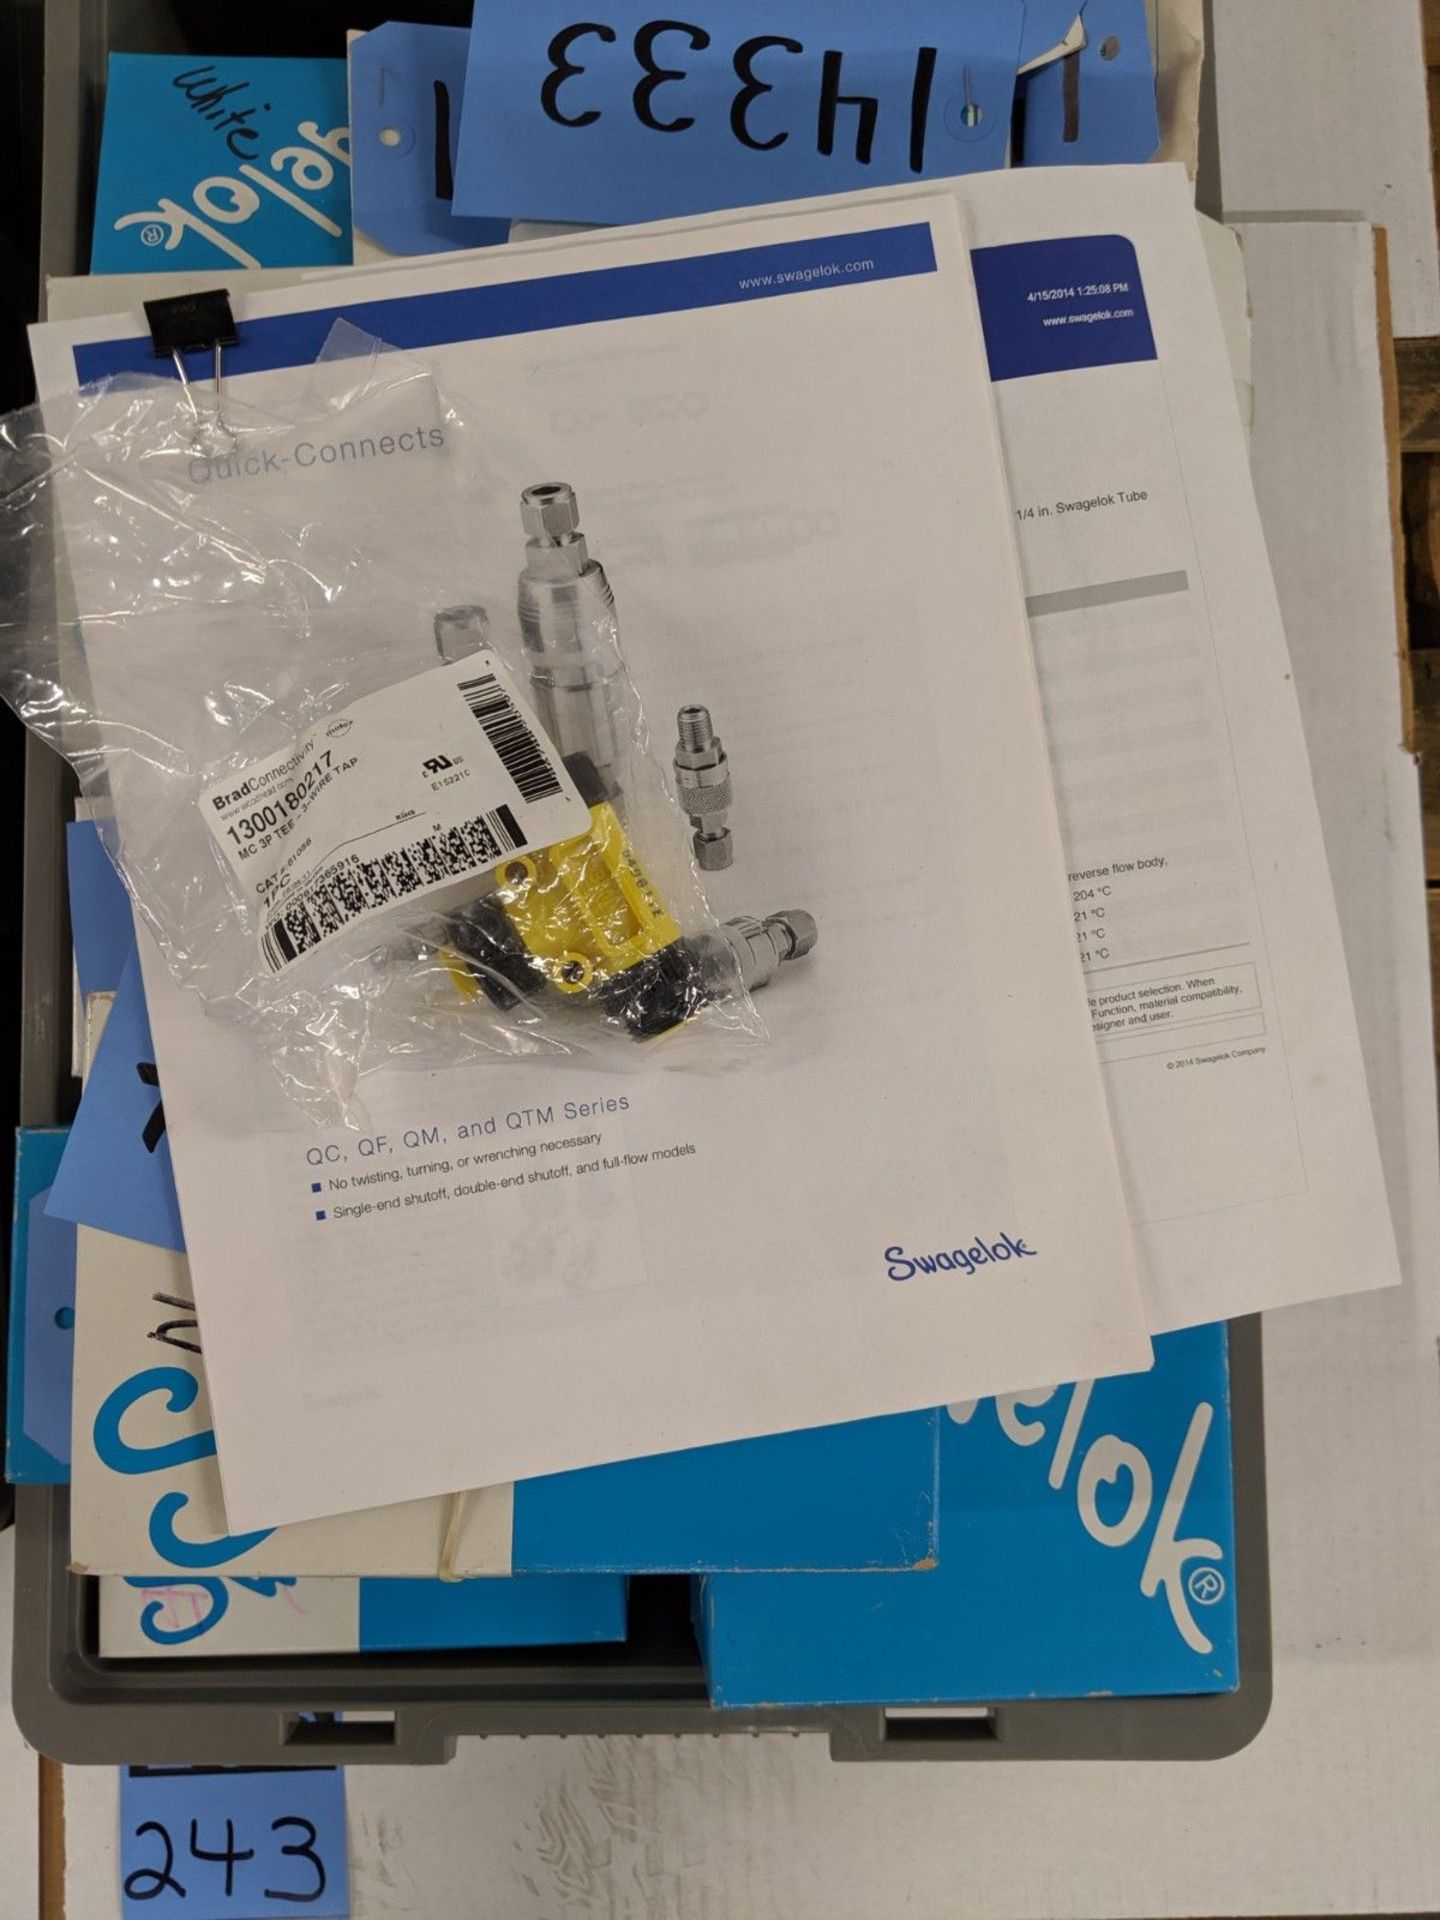 (LOT) HOSE AND TUBING CONNECTORS BY SWAGELOK, RYCO, AND BRAD CONNECTIVITY ** (1) SKID ** - Image 2 of 6